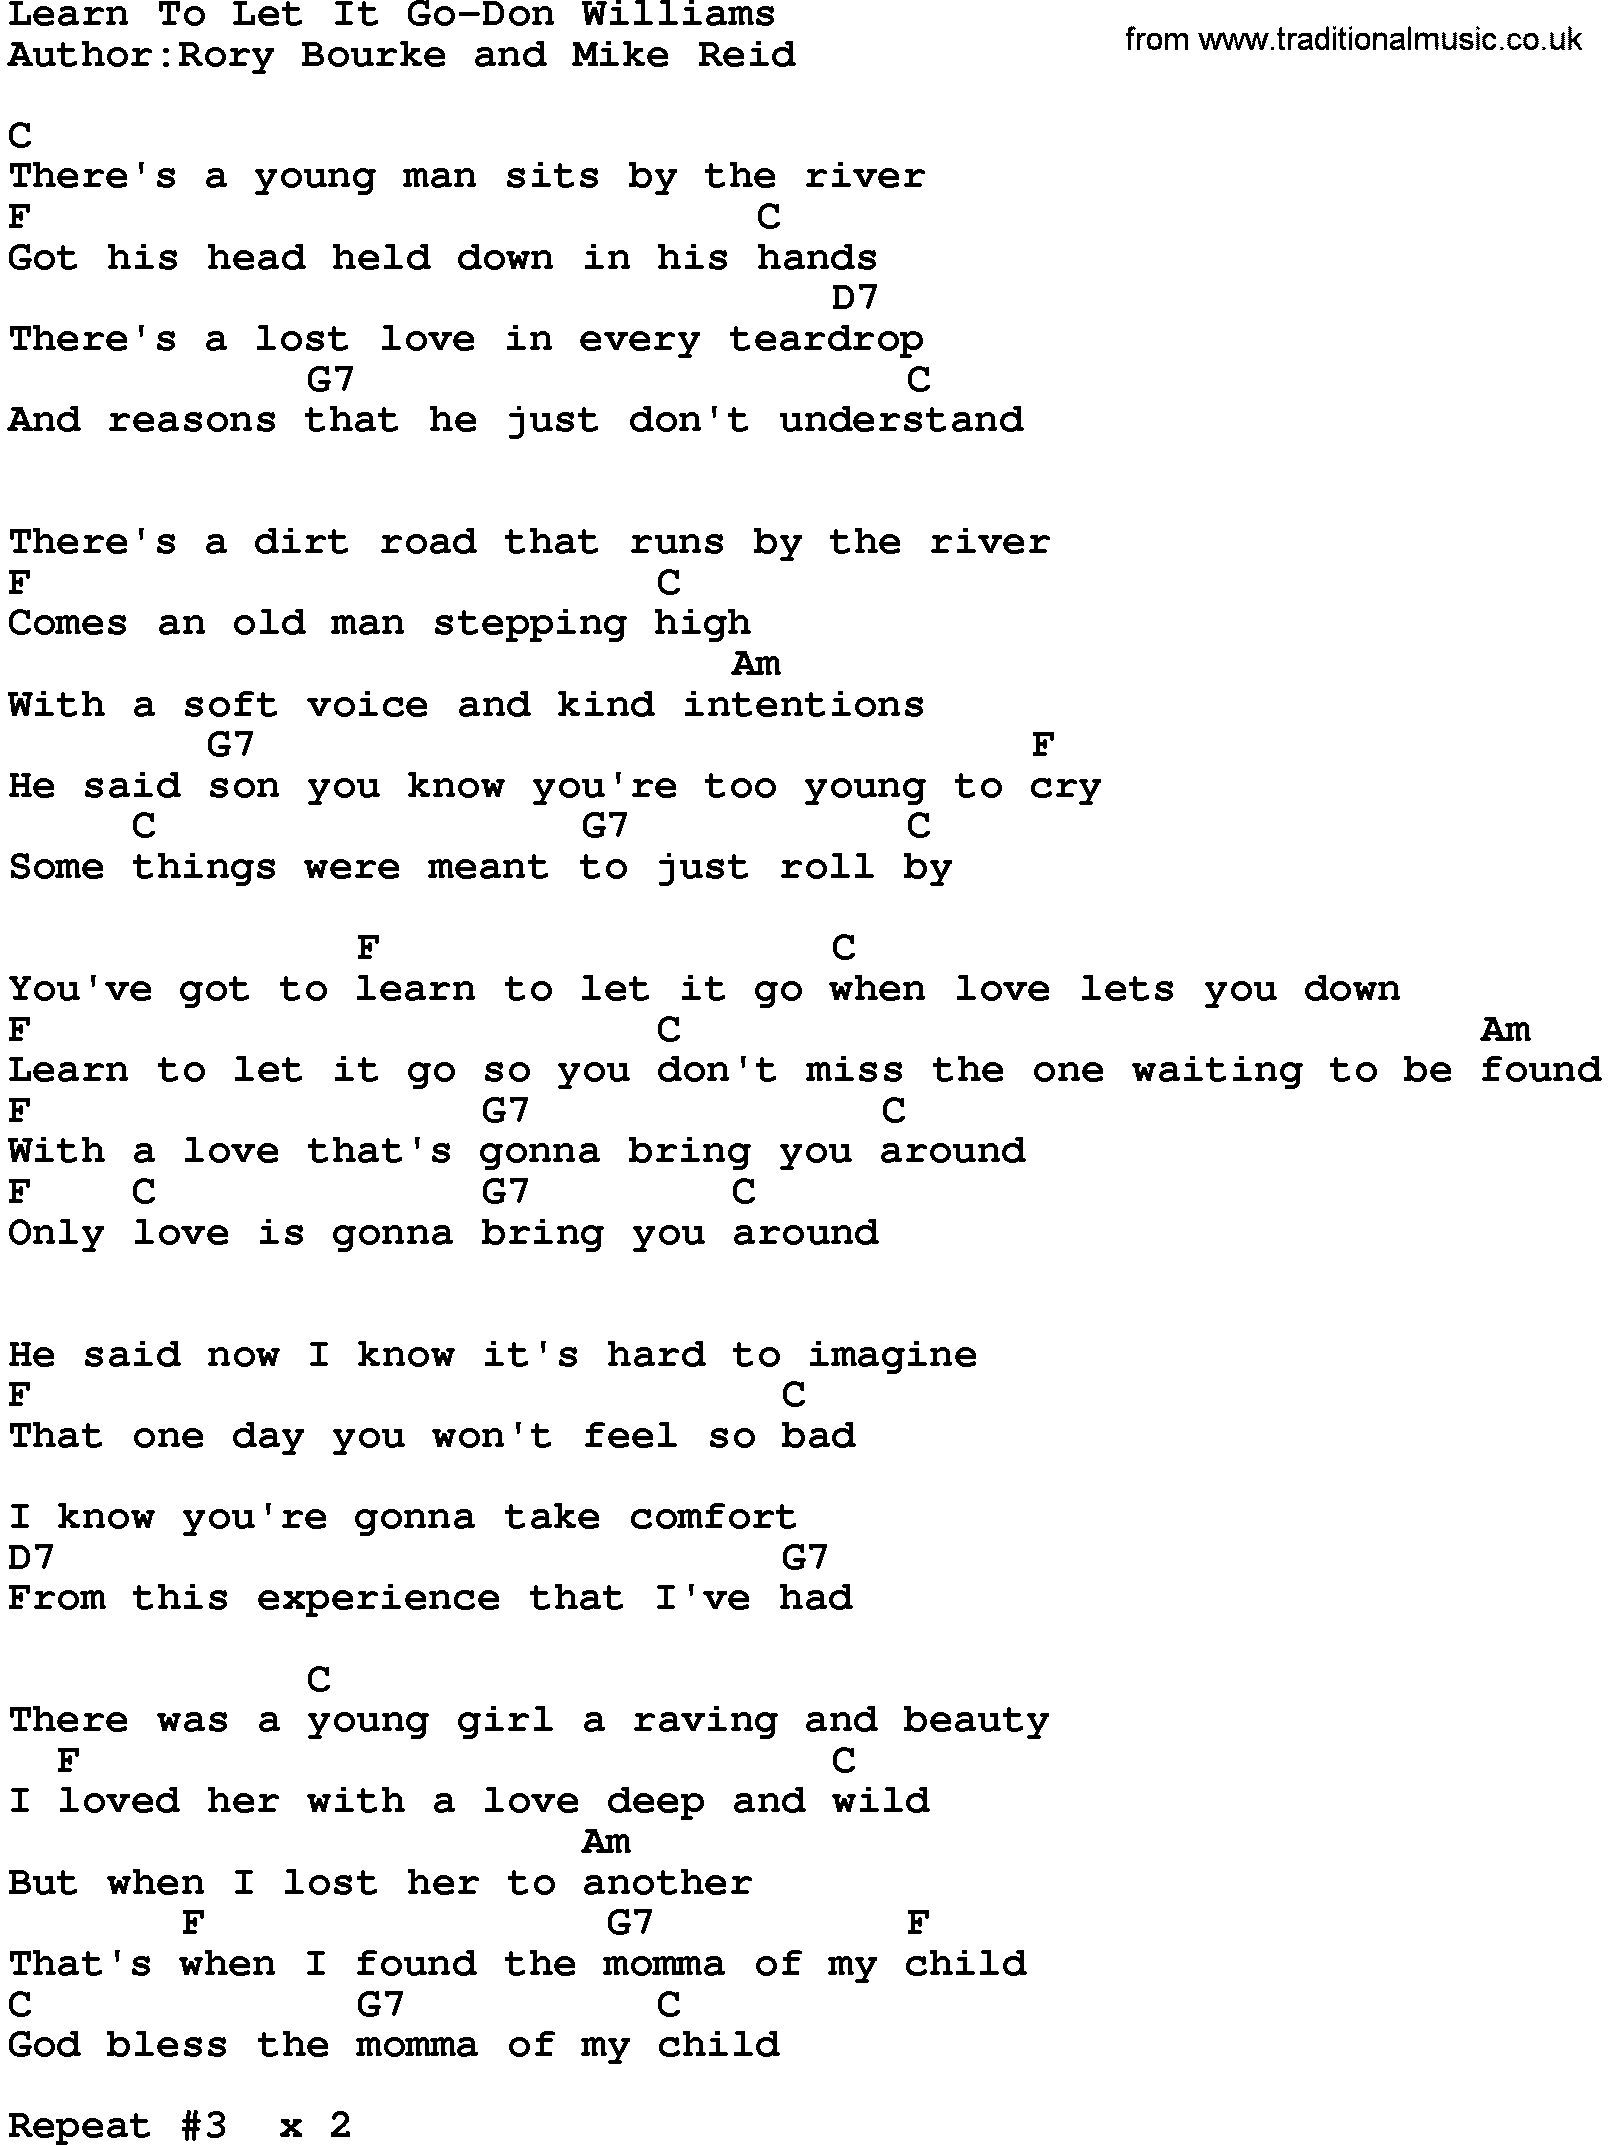 Let It Go Chords Country Musiclearn To Let It Go Don Williams Lyrics And Chords